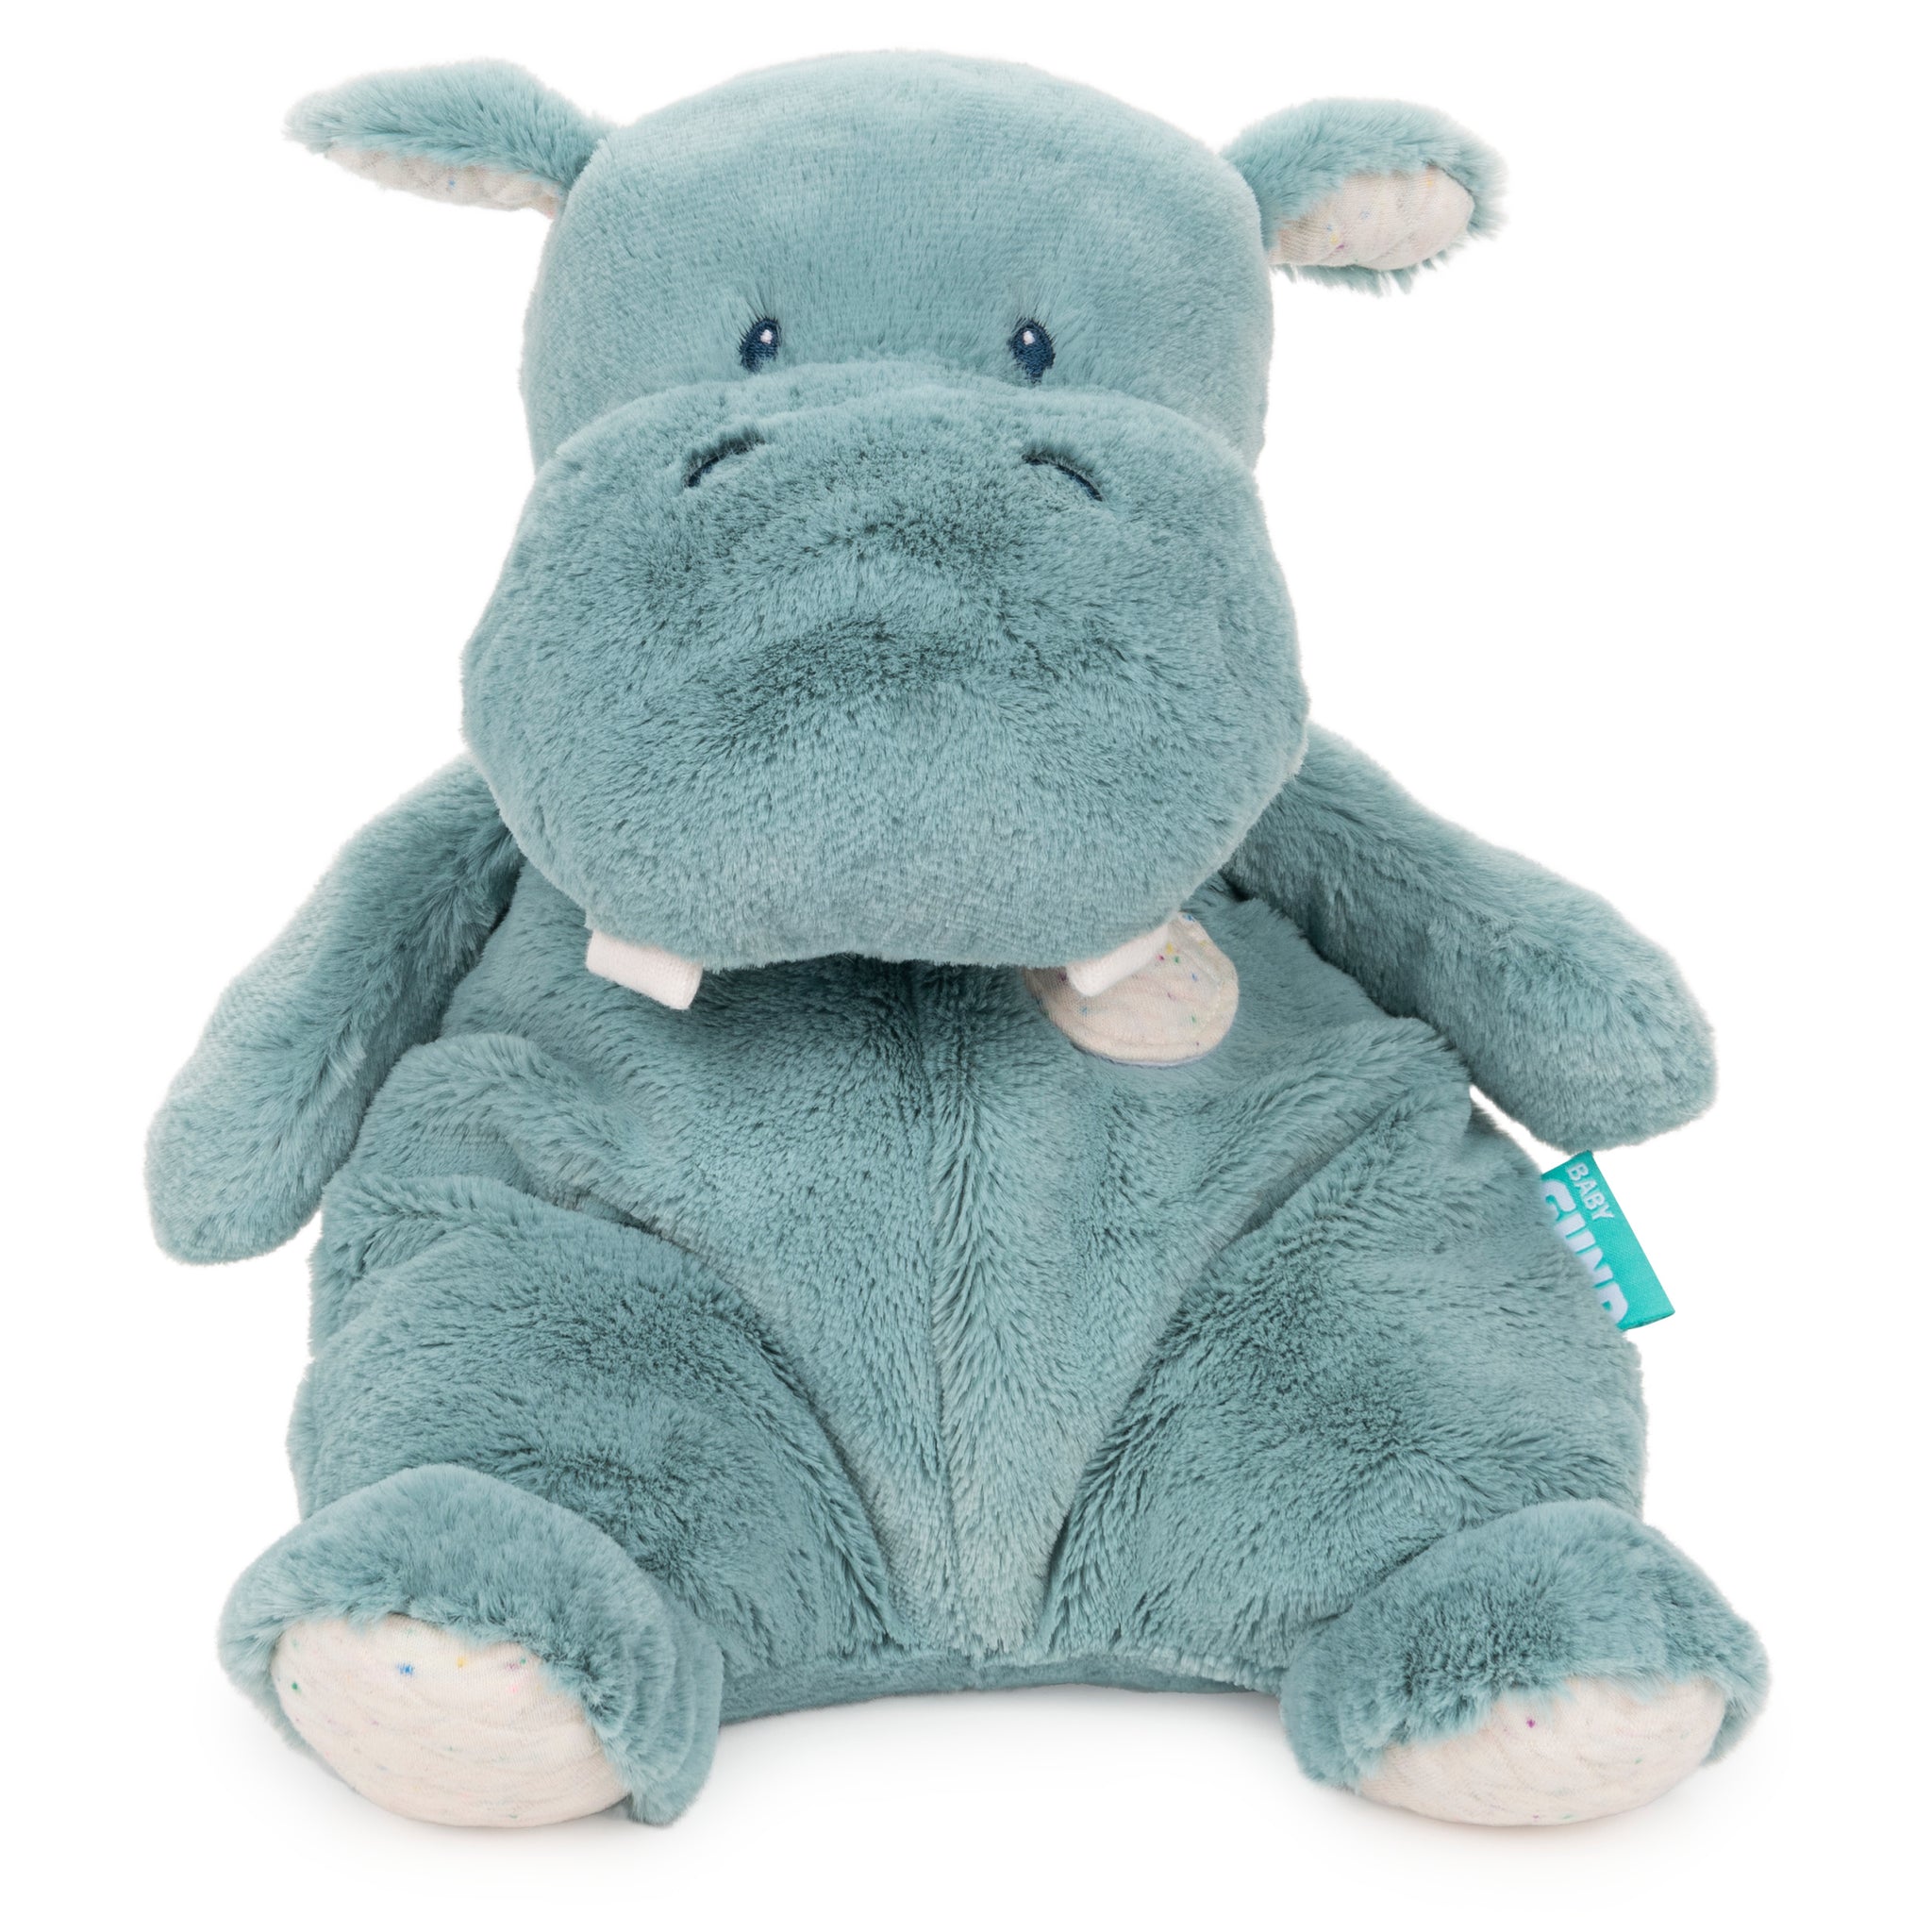 Baby Gund Oh So Snuggly Hippo Large Plush, 12.5”